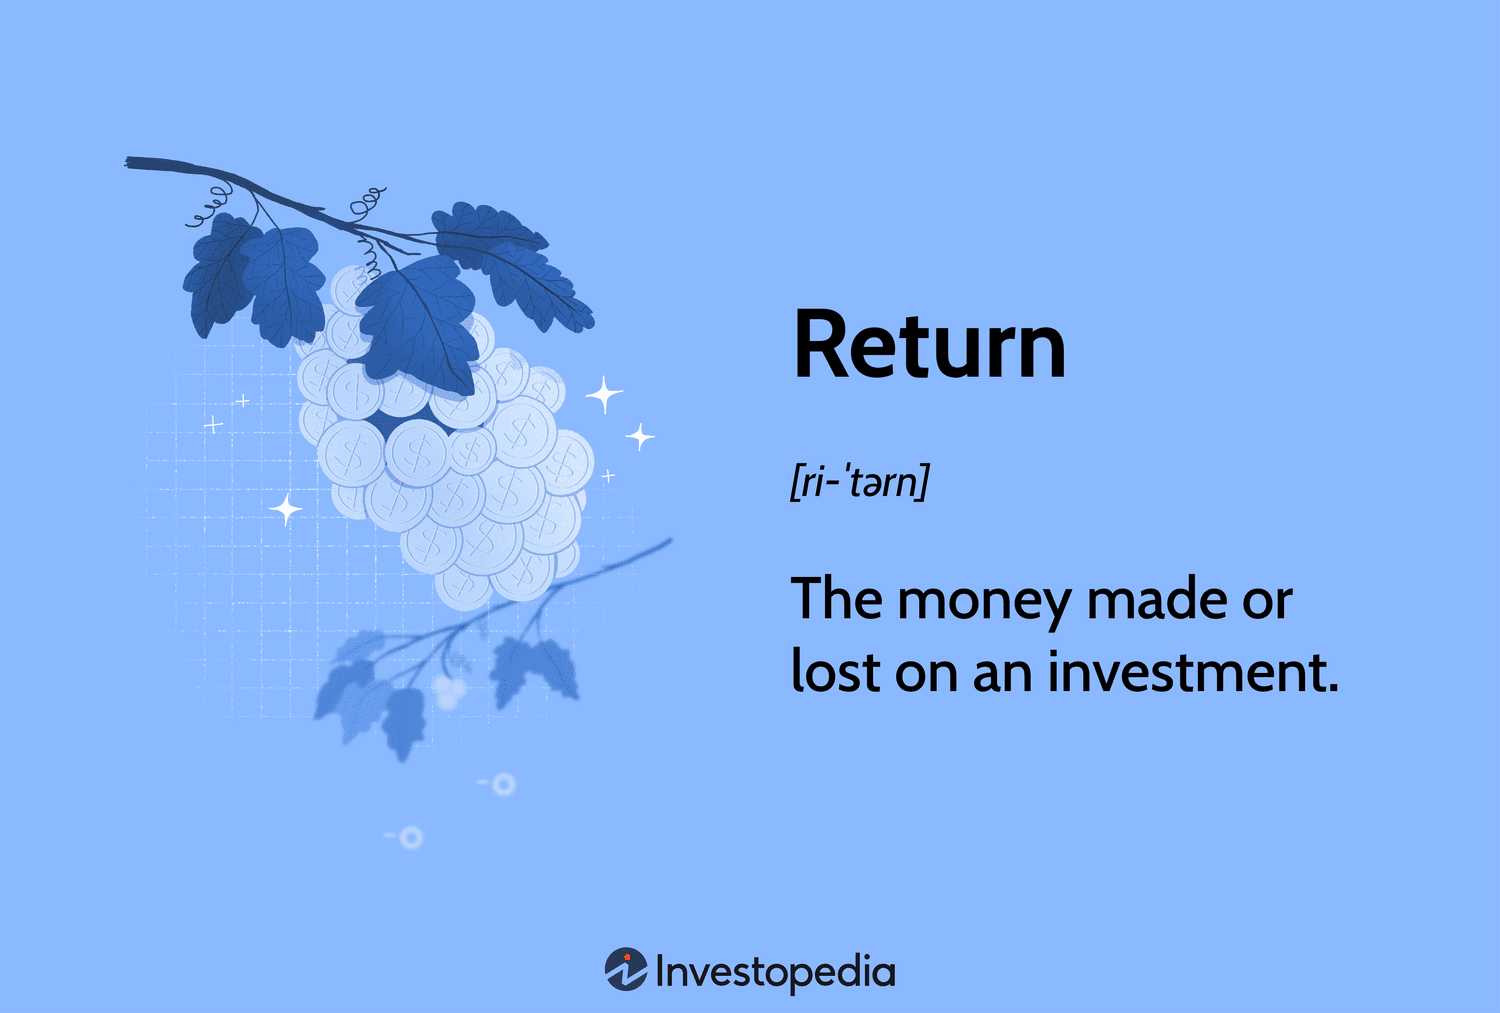 Return: The money made or lost on an investment.